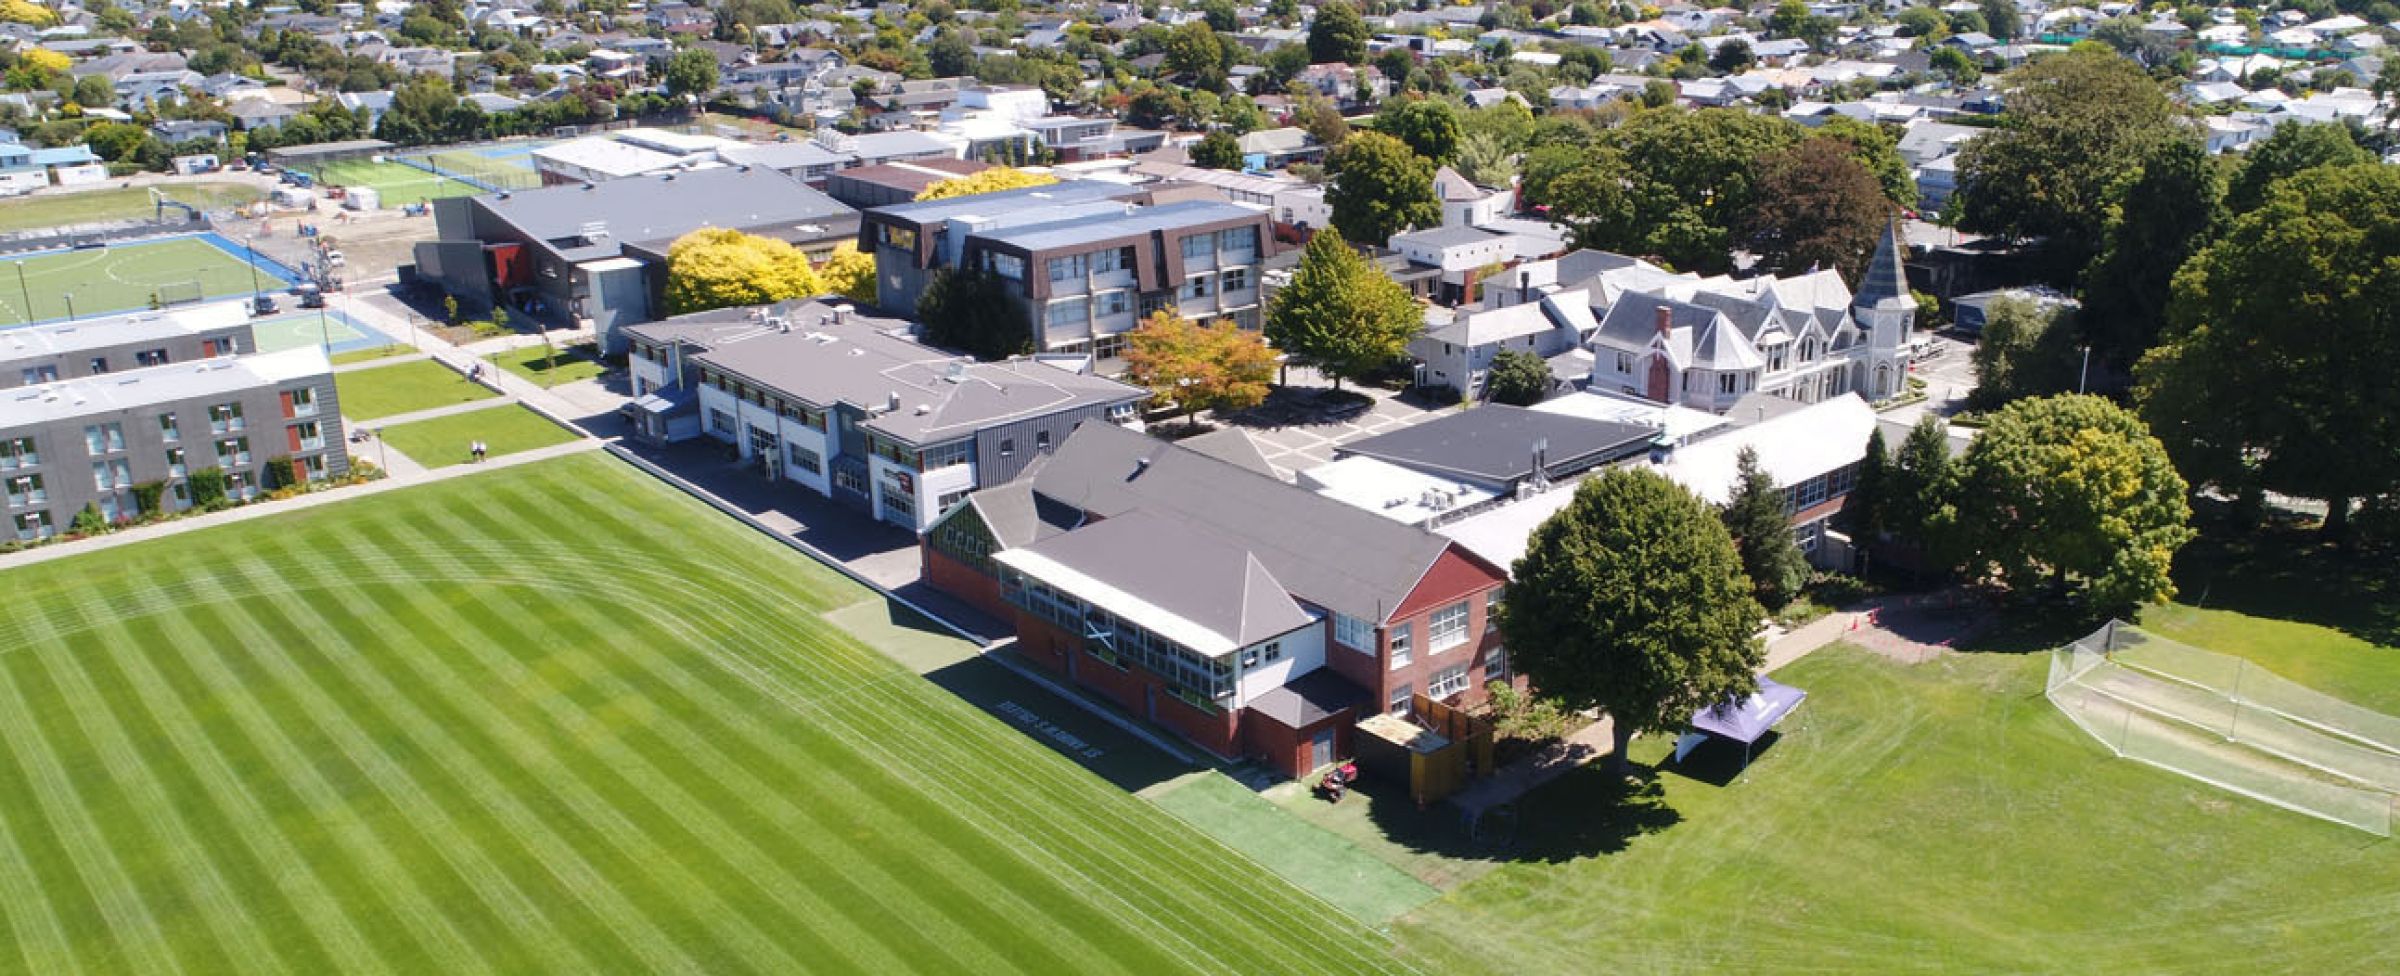 Drone photo of the St Andrew's College campus.